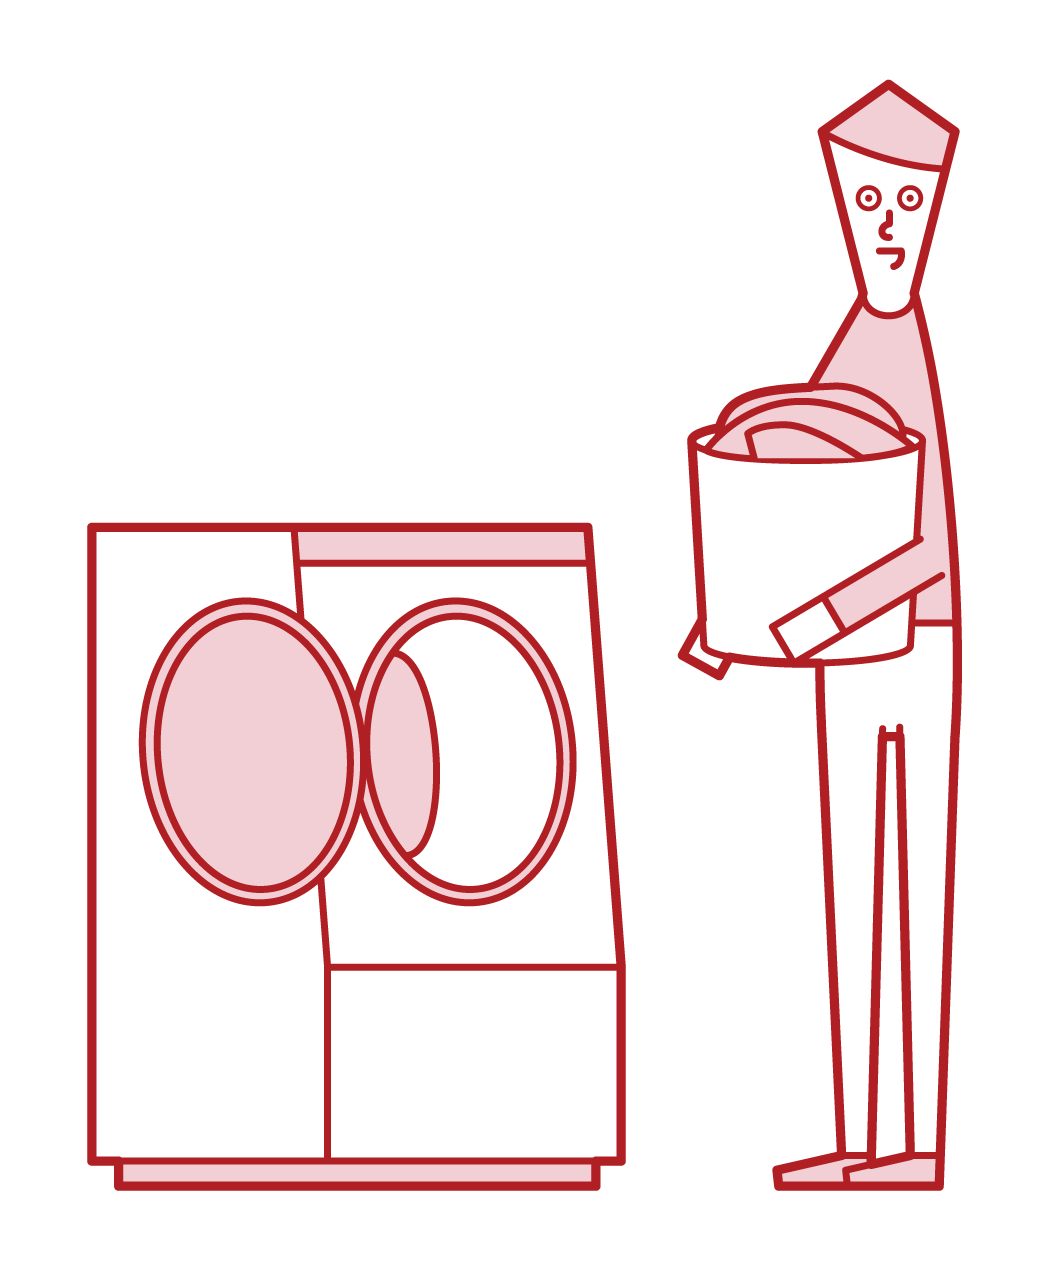 Illustration of a man doing laundry